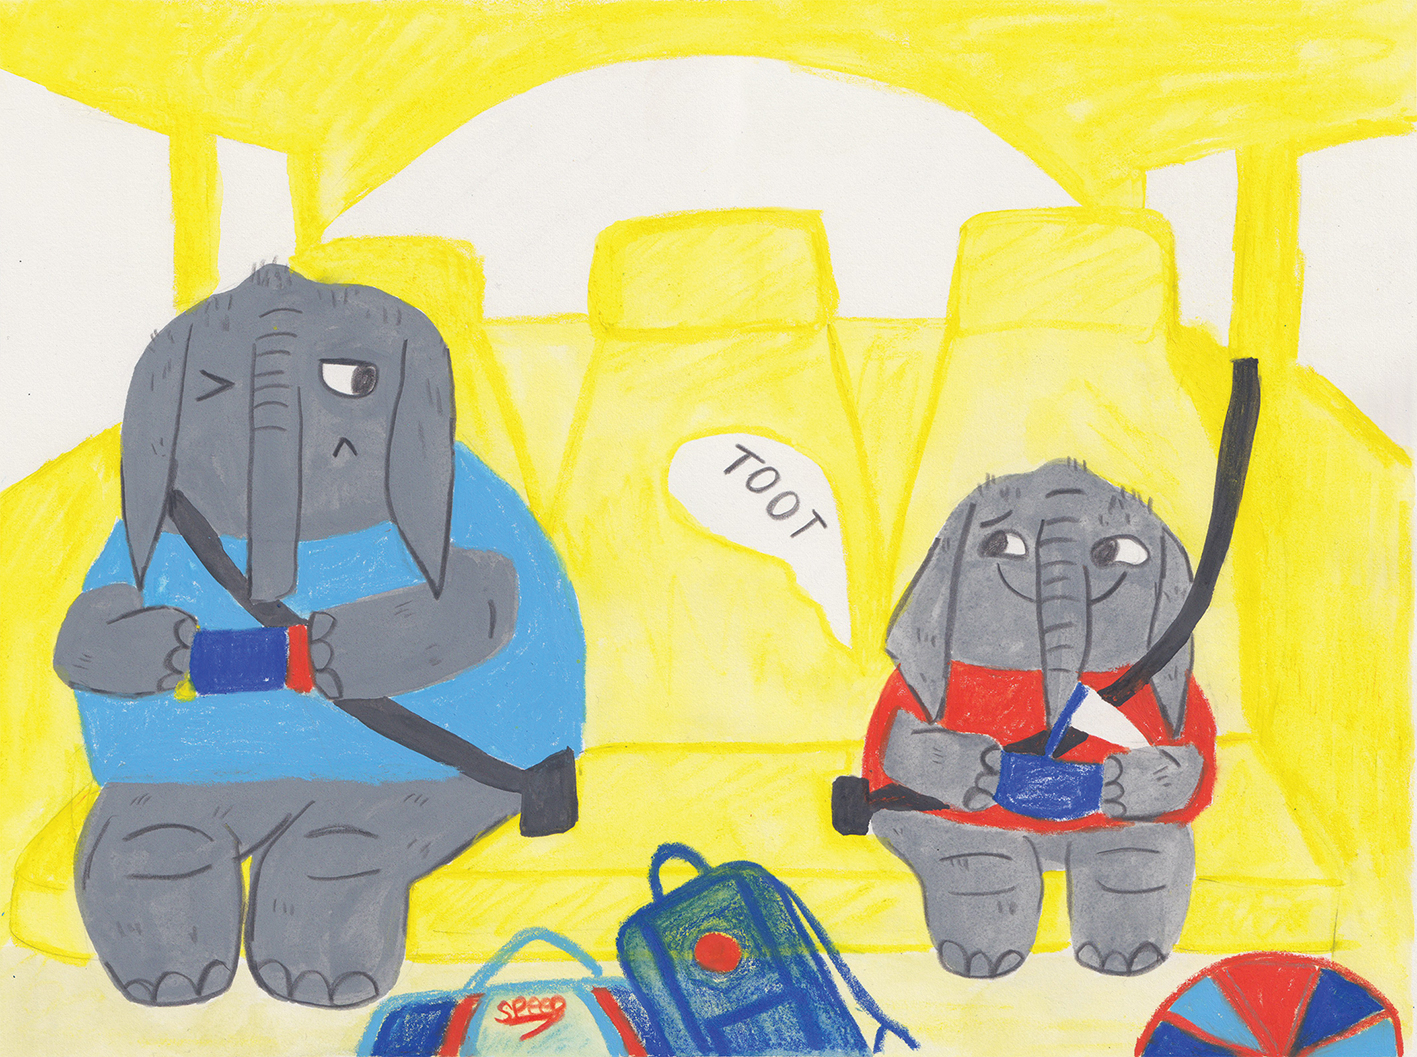 Artwork from “Being an Elephant is Great!”